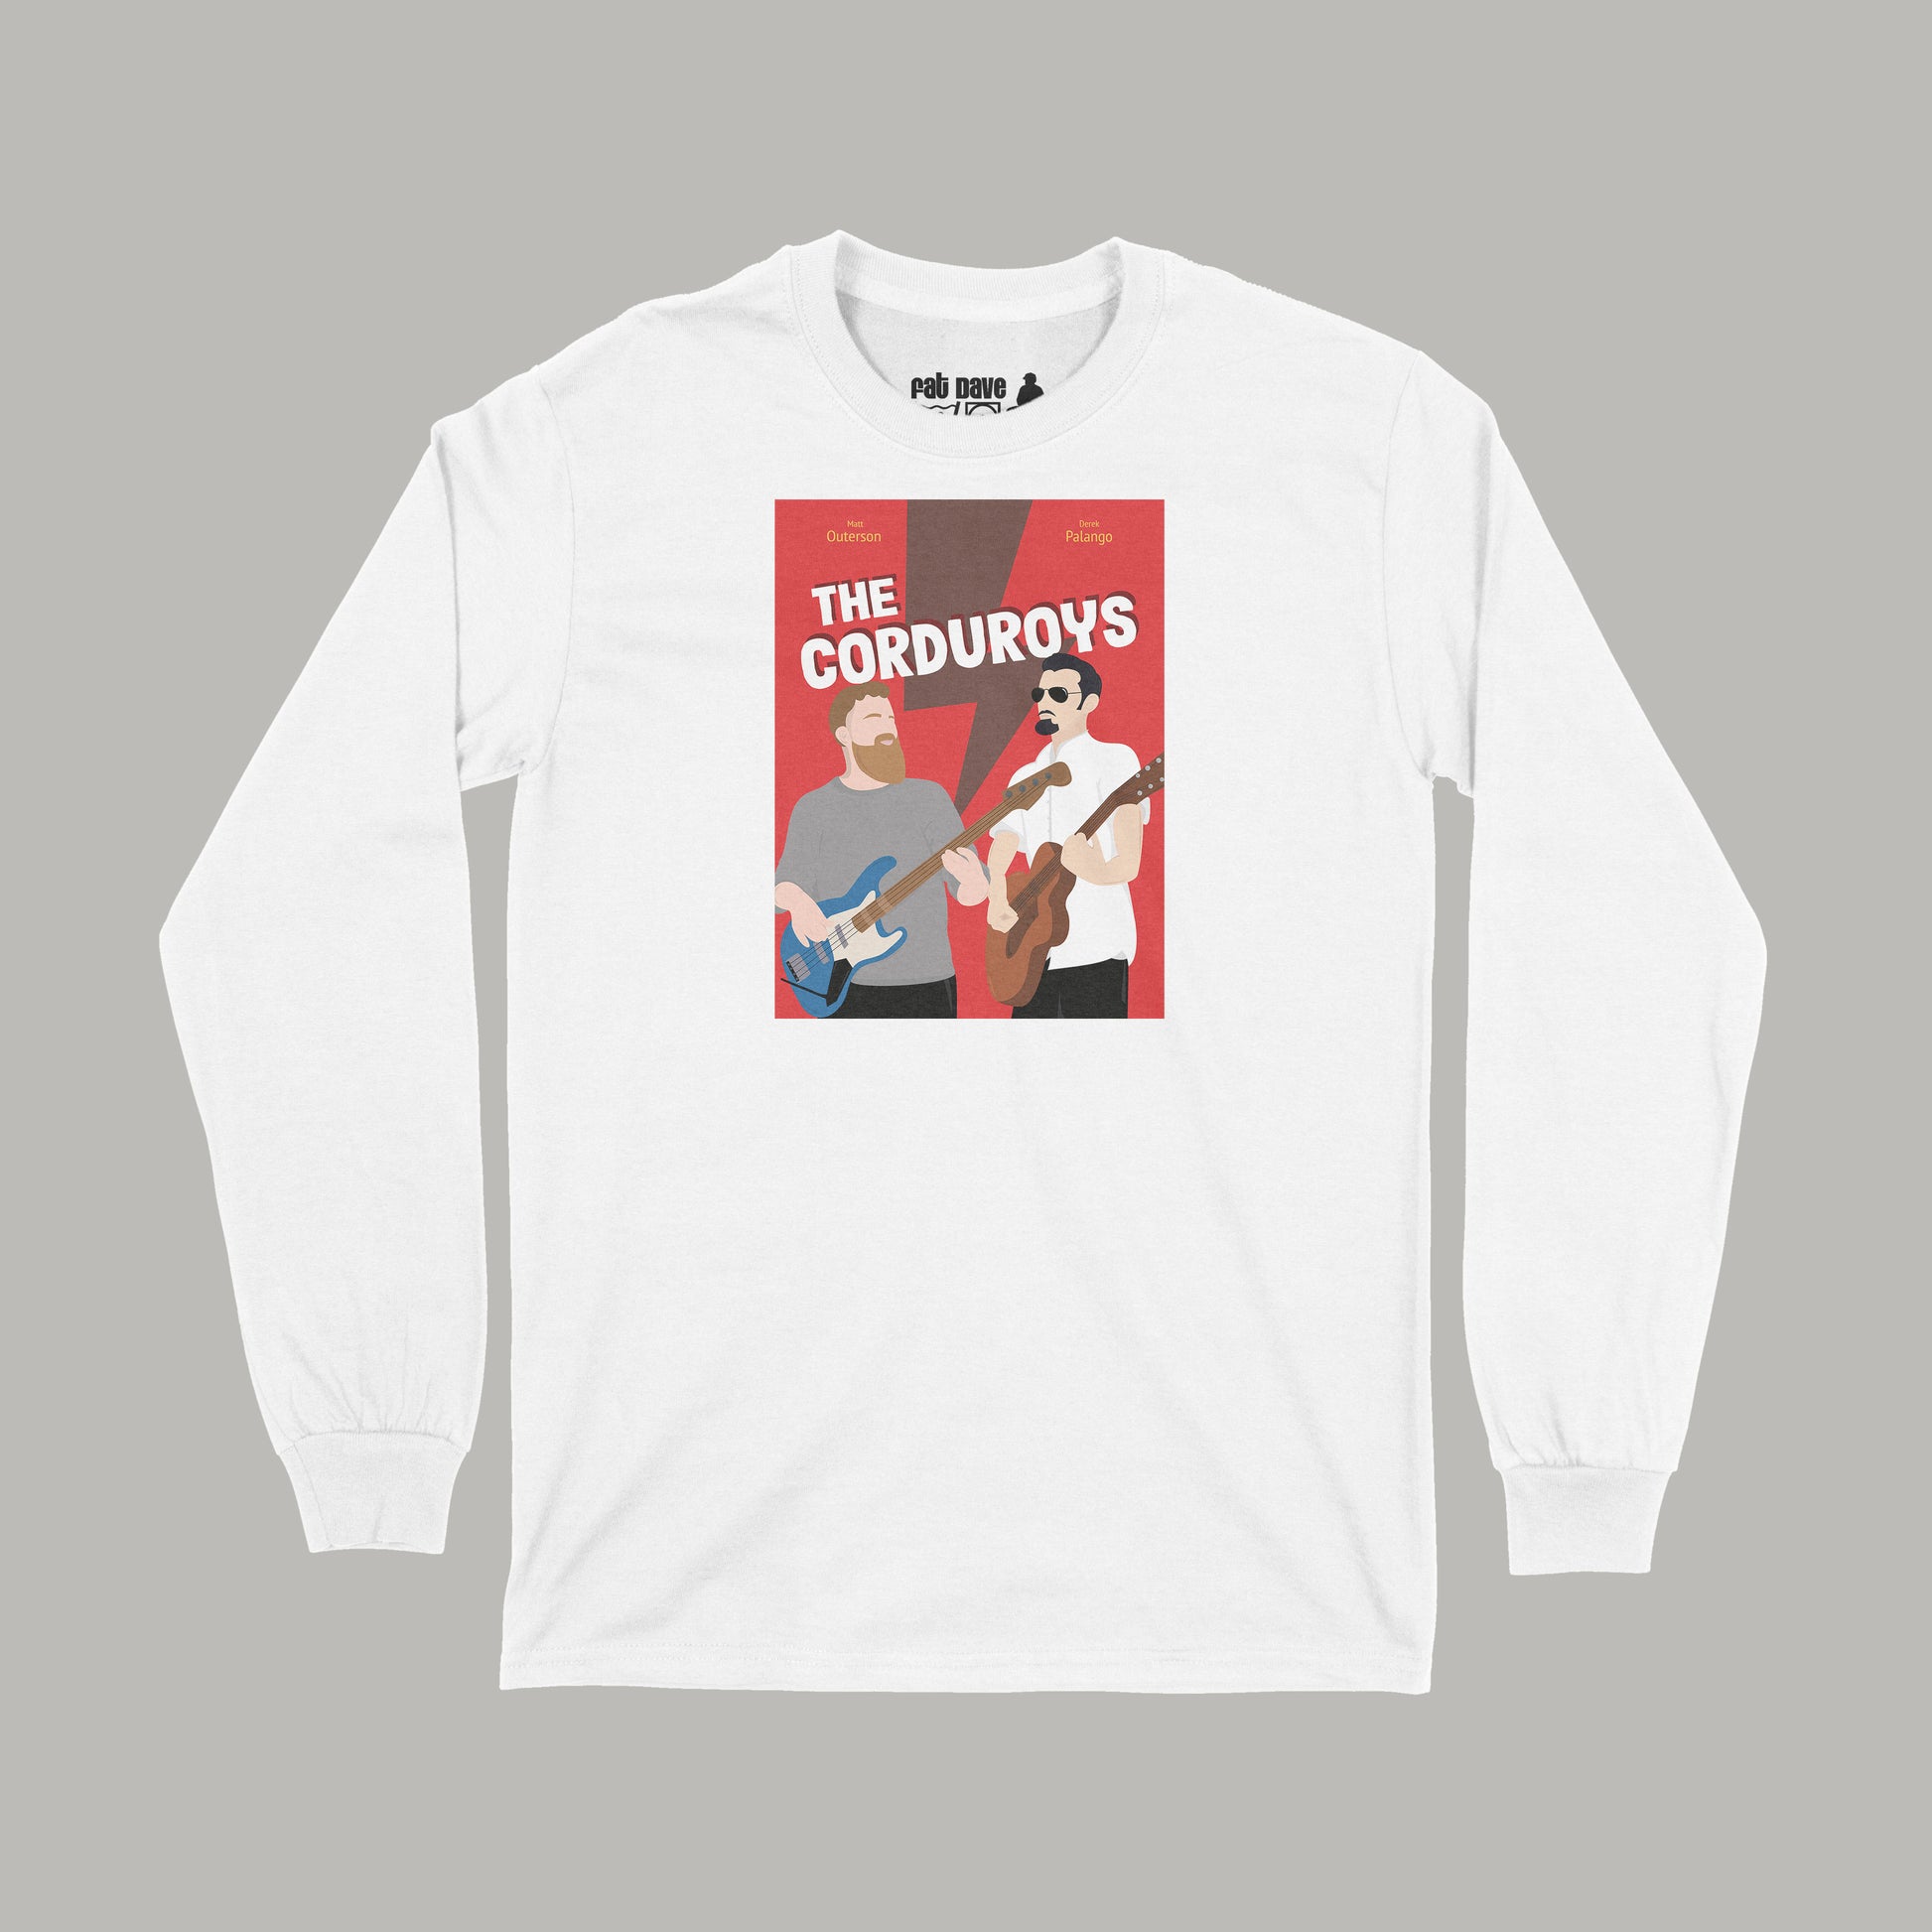 Brantford, Fat Dave, Long Sleeve T-Shirt, Musician, Poster, The Corduroys, White